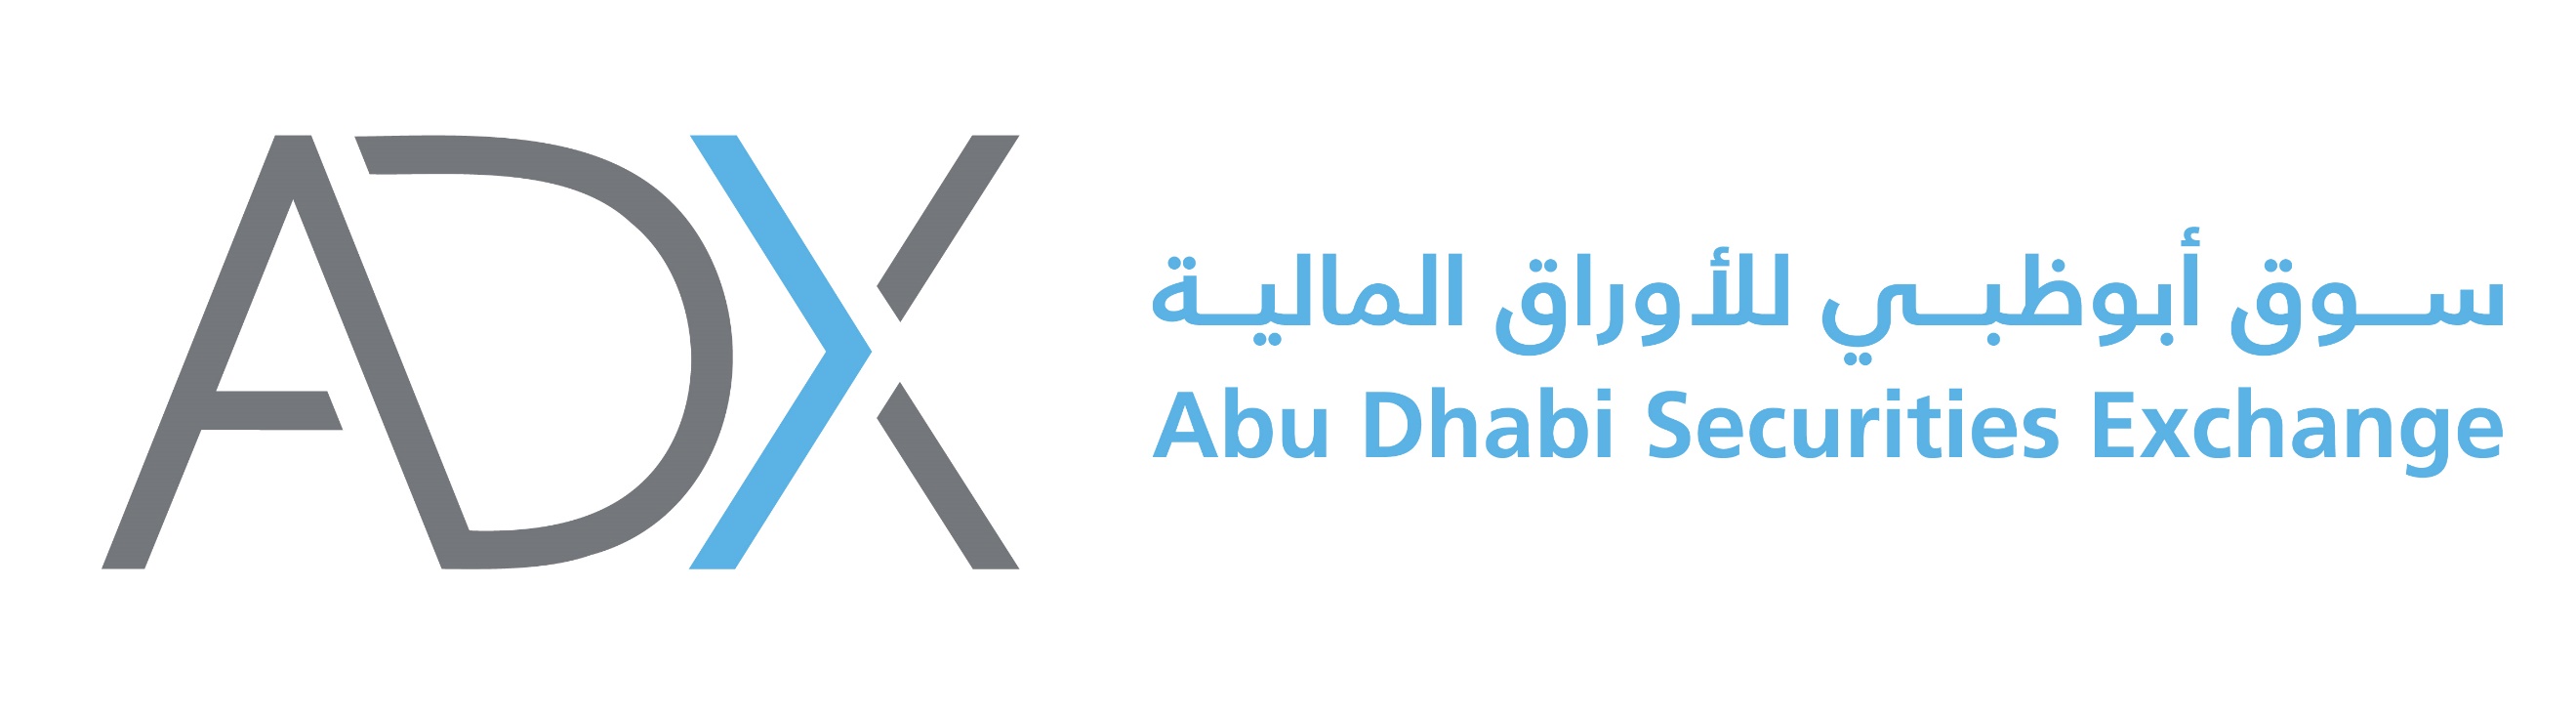 ADX Derivatives Market Celebrates One Year Of Success With AED 1 Billion In Trades